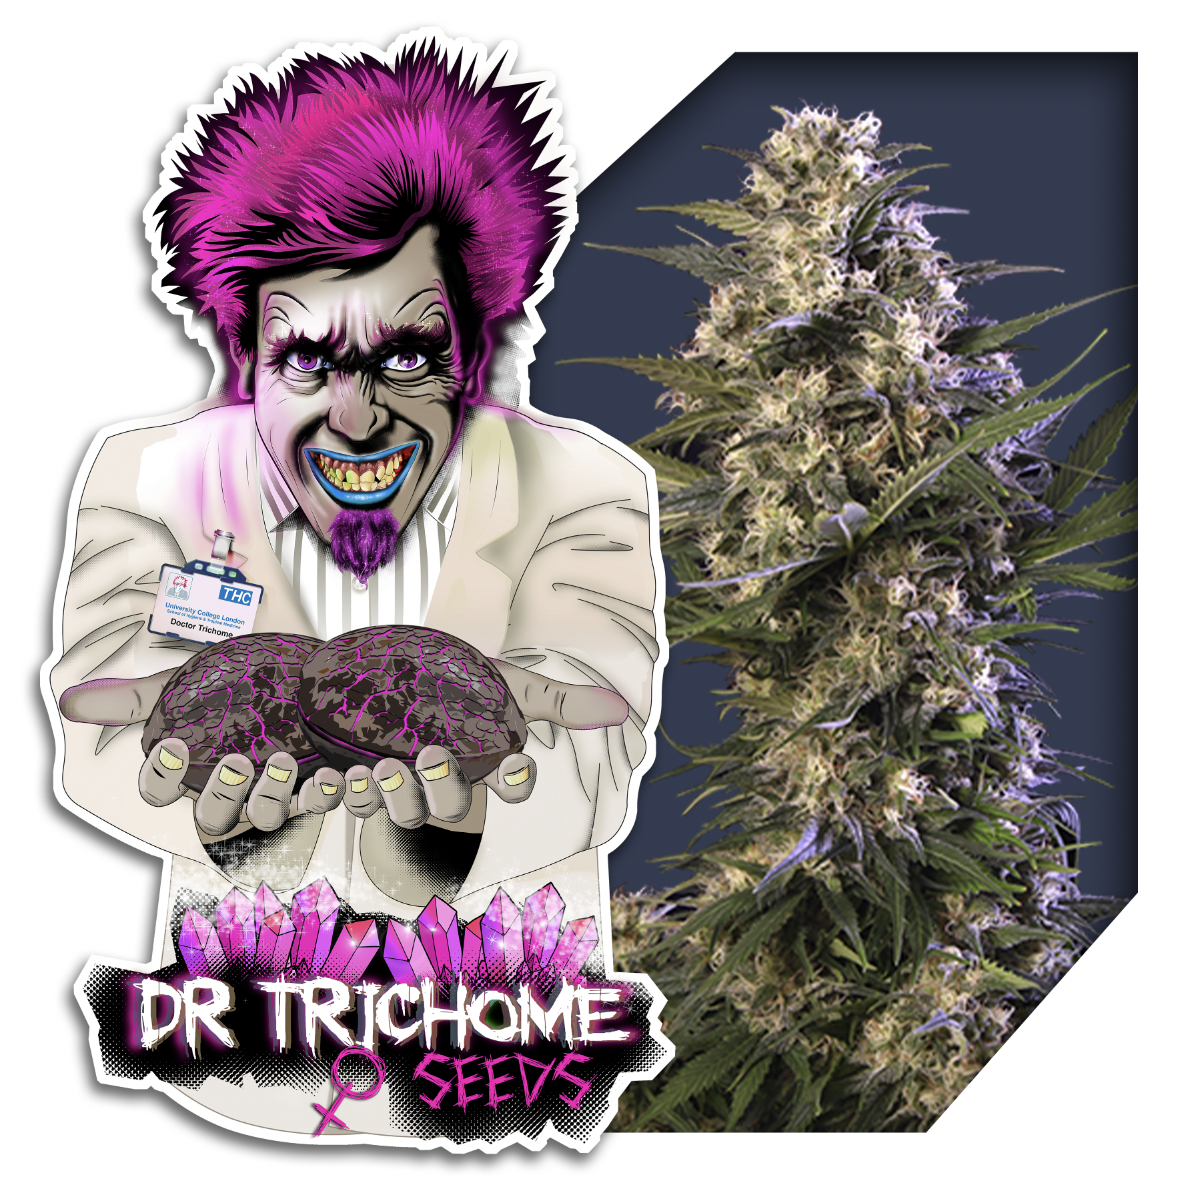 Dr Trichome Cheesefast Version Seeds